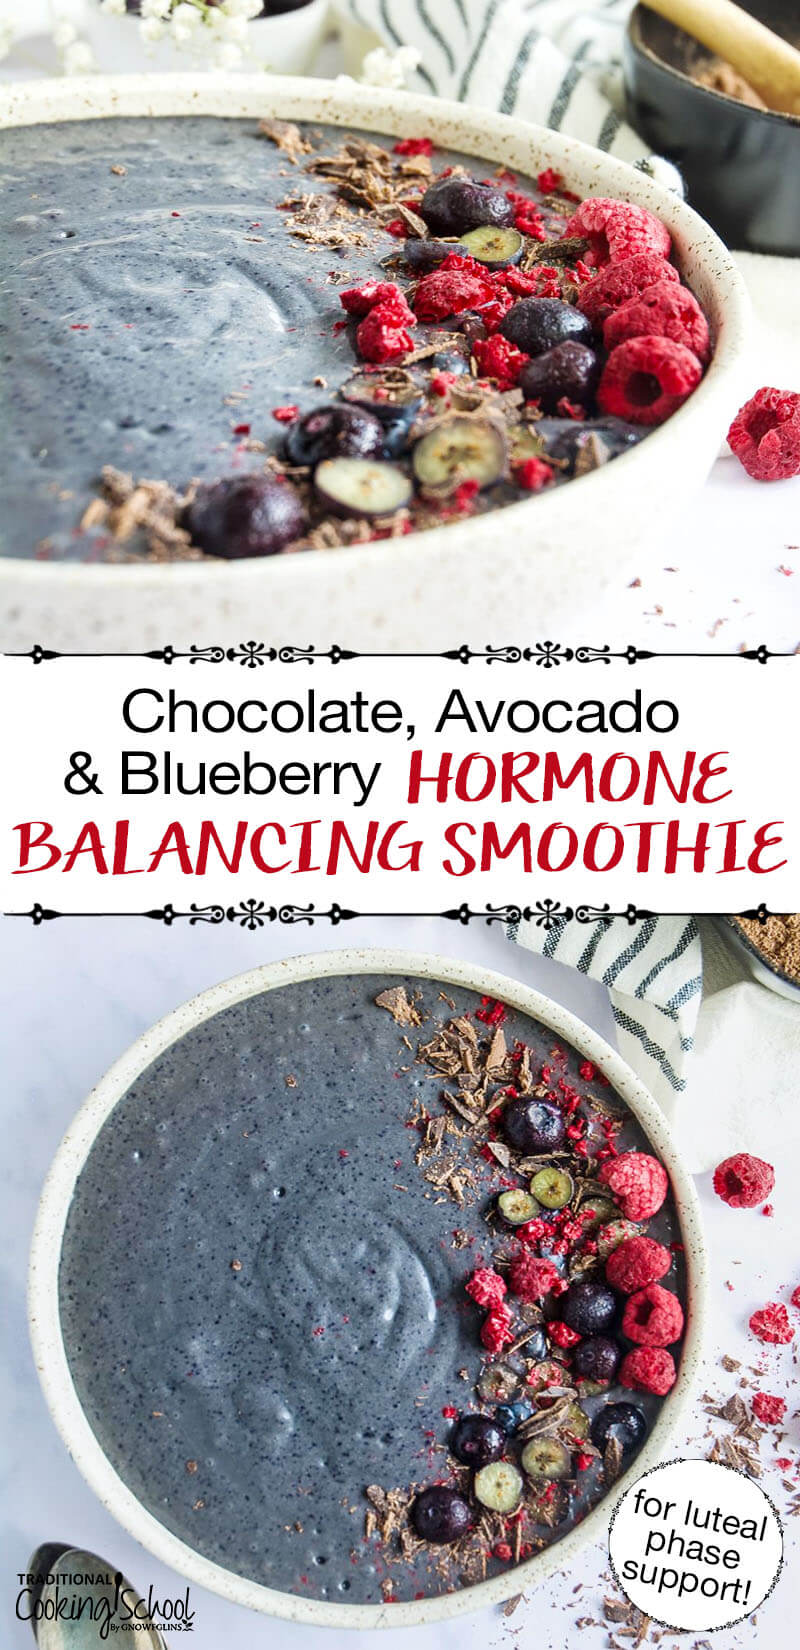 photo collage of a blue-purple smoothie bowl garnished with blueberries, raspberries, and shaved chocolate. Text overlay: "Chocolate, Avocado & Blueberry Hormone Balancing Smoothie (for luteal phase support!)"